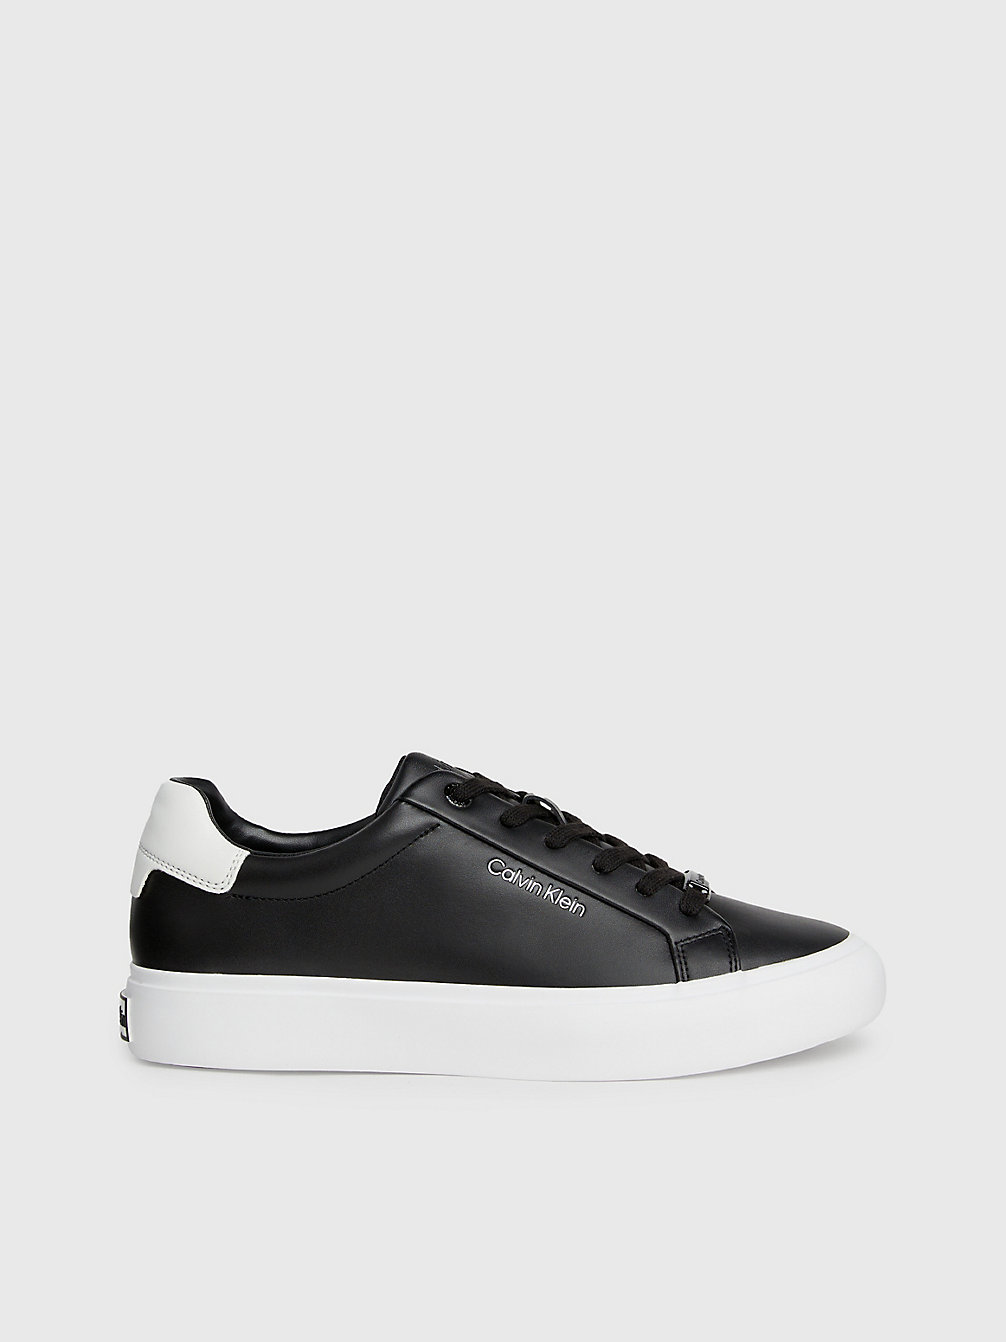 BLACK/WHITE Leather Trainers undefined Women Calvin Klein